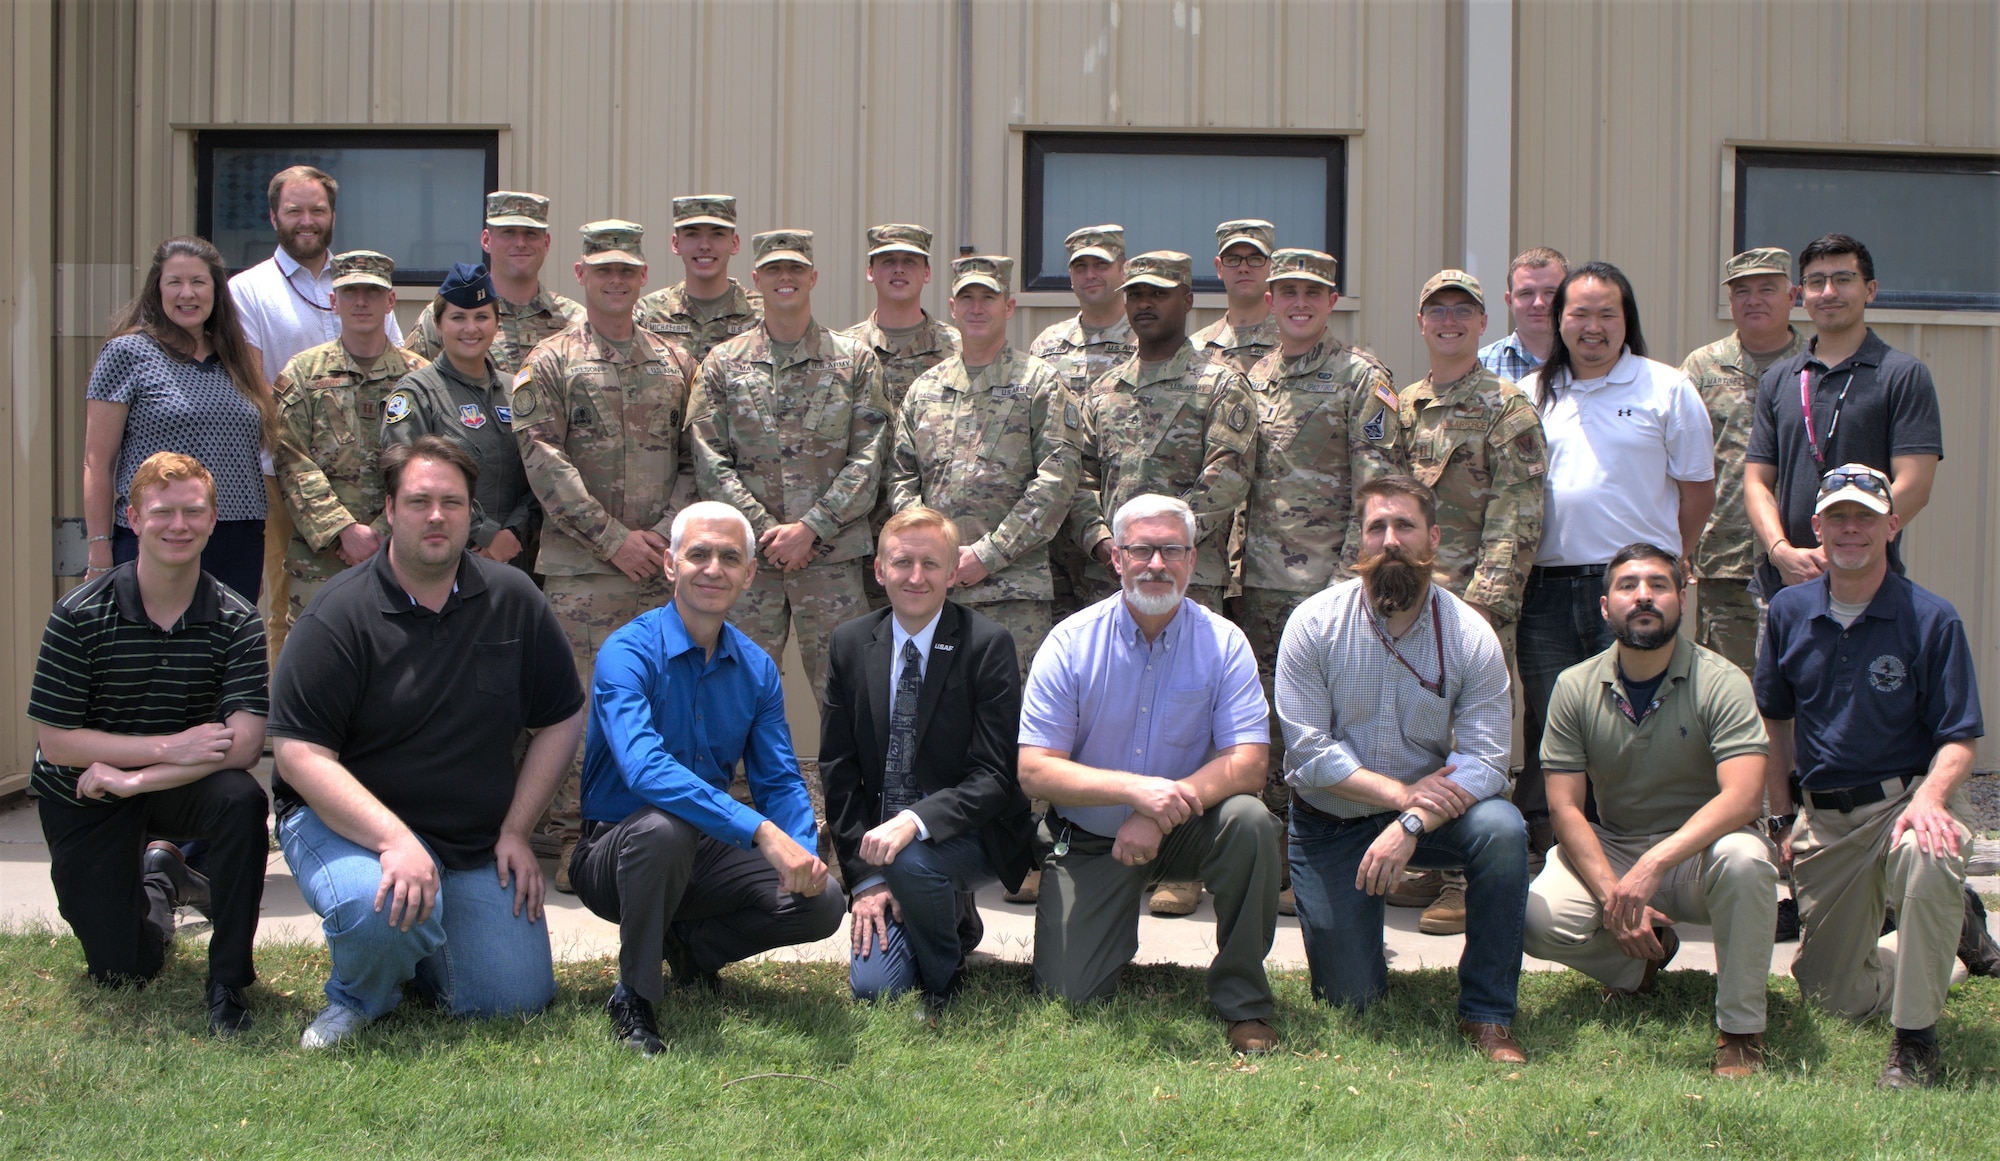 The Air Force Research Laboratory Directed Energy Utility Concept Experiment (DEUCE) team and participants. The AFRL Directed Energy Directorate held the DEUCE wargaming modeling and simulation experiment June 21 – 25 at Kirtland AFB, N.M. (Courtesy photo)